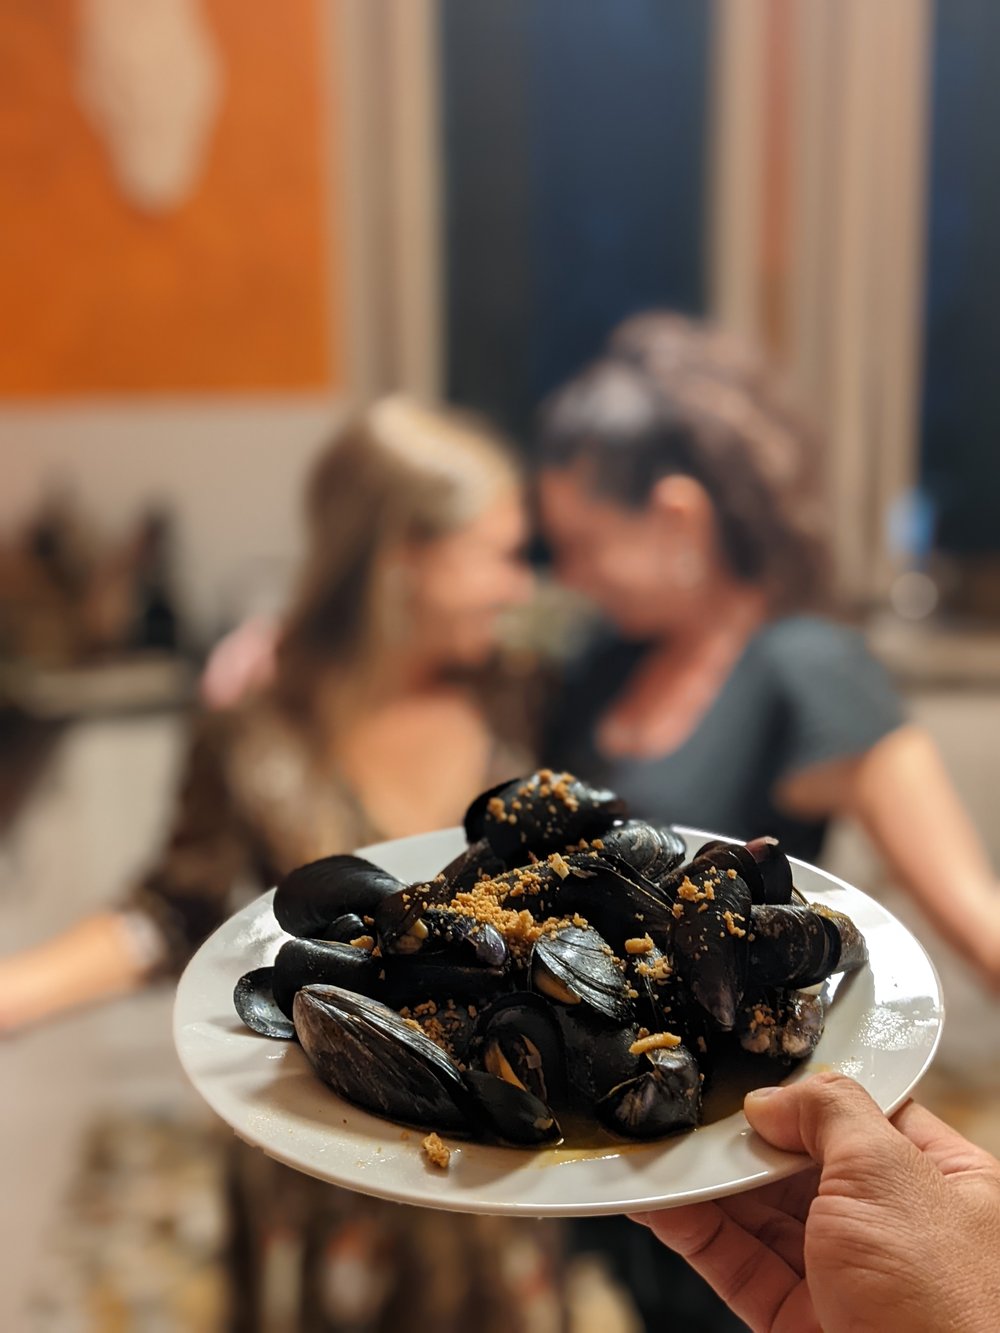  Wendi and Jessica getting intimate with mussels in the foreground 